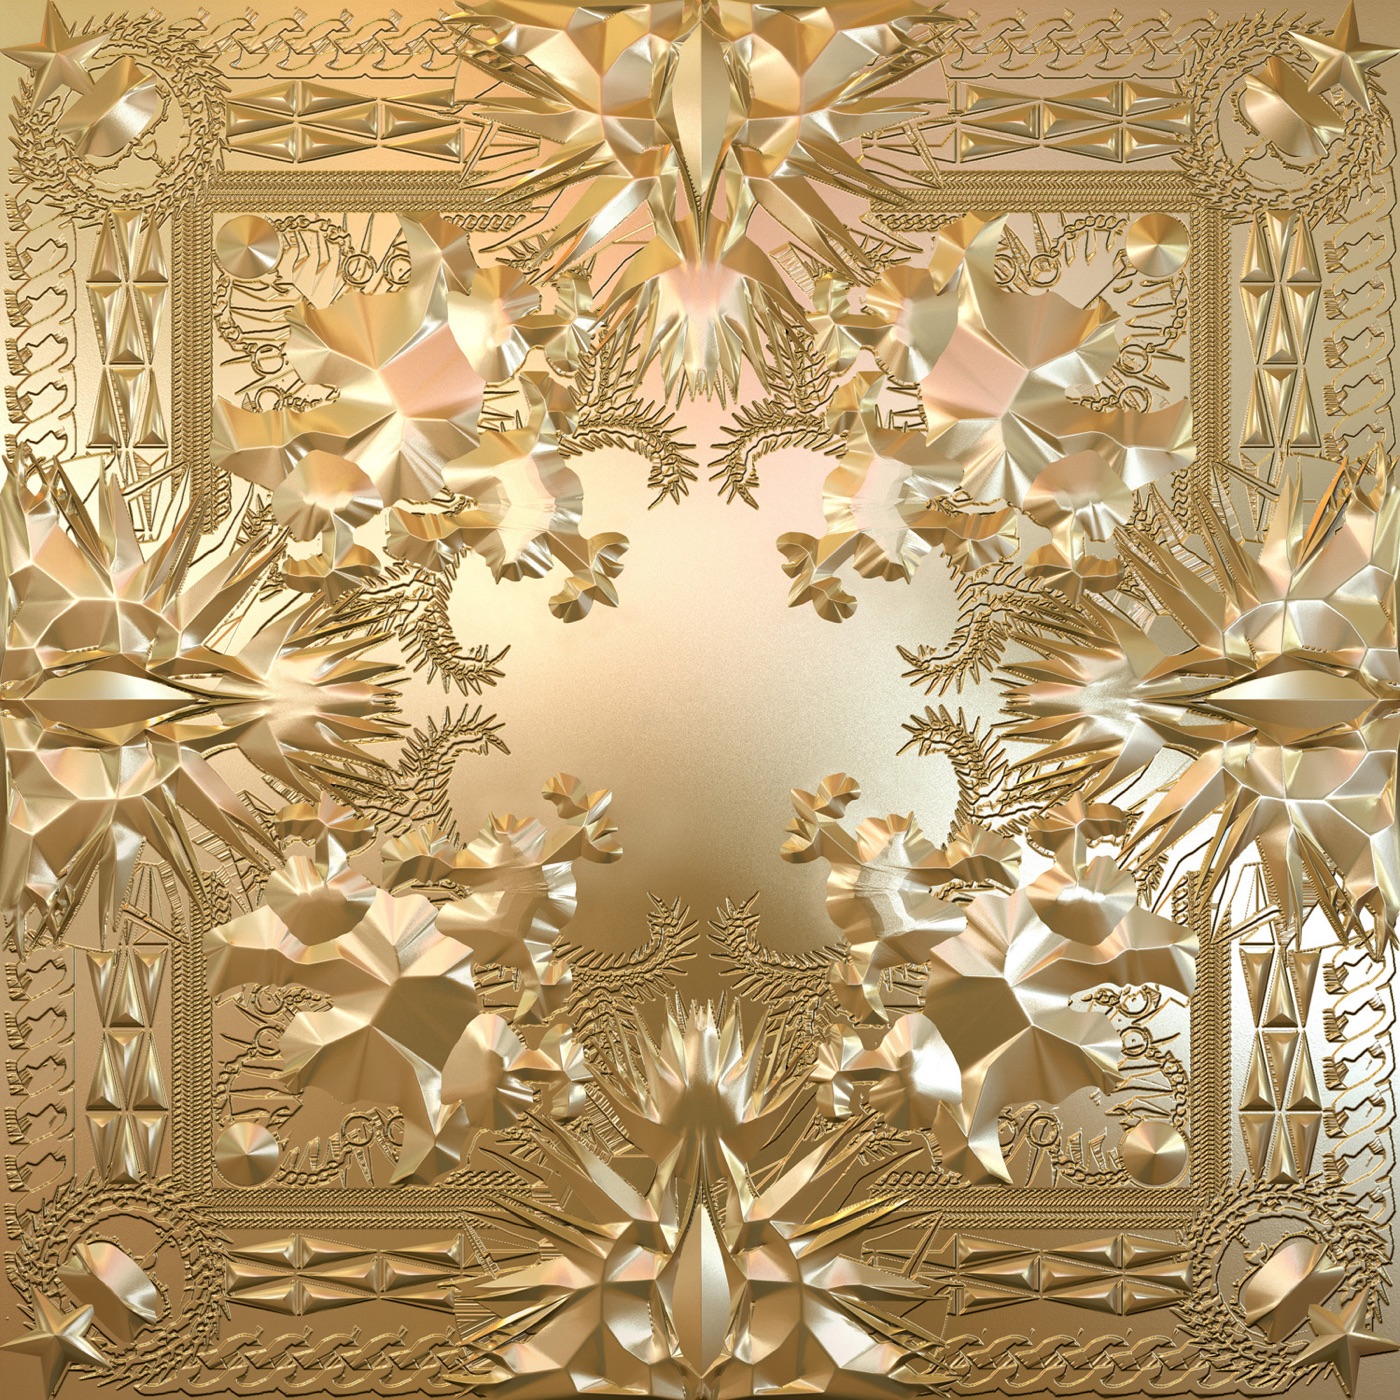 Watch the Throne by JAY-Z, Kanye West